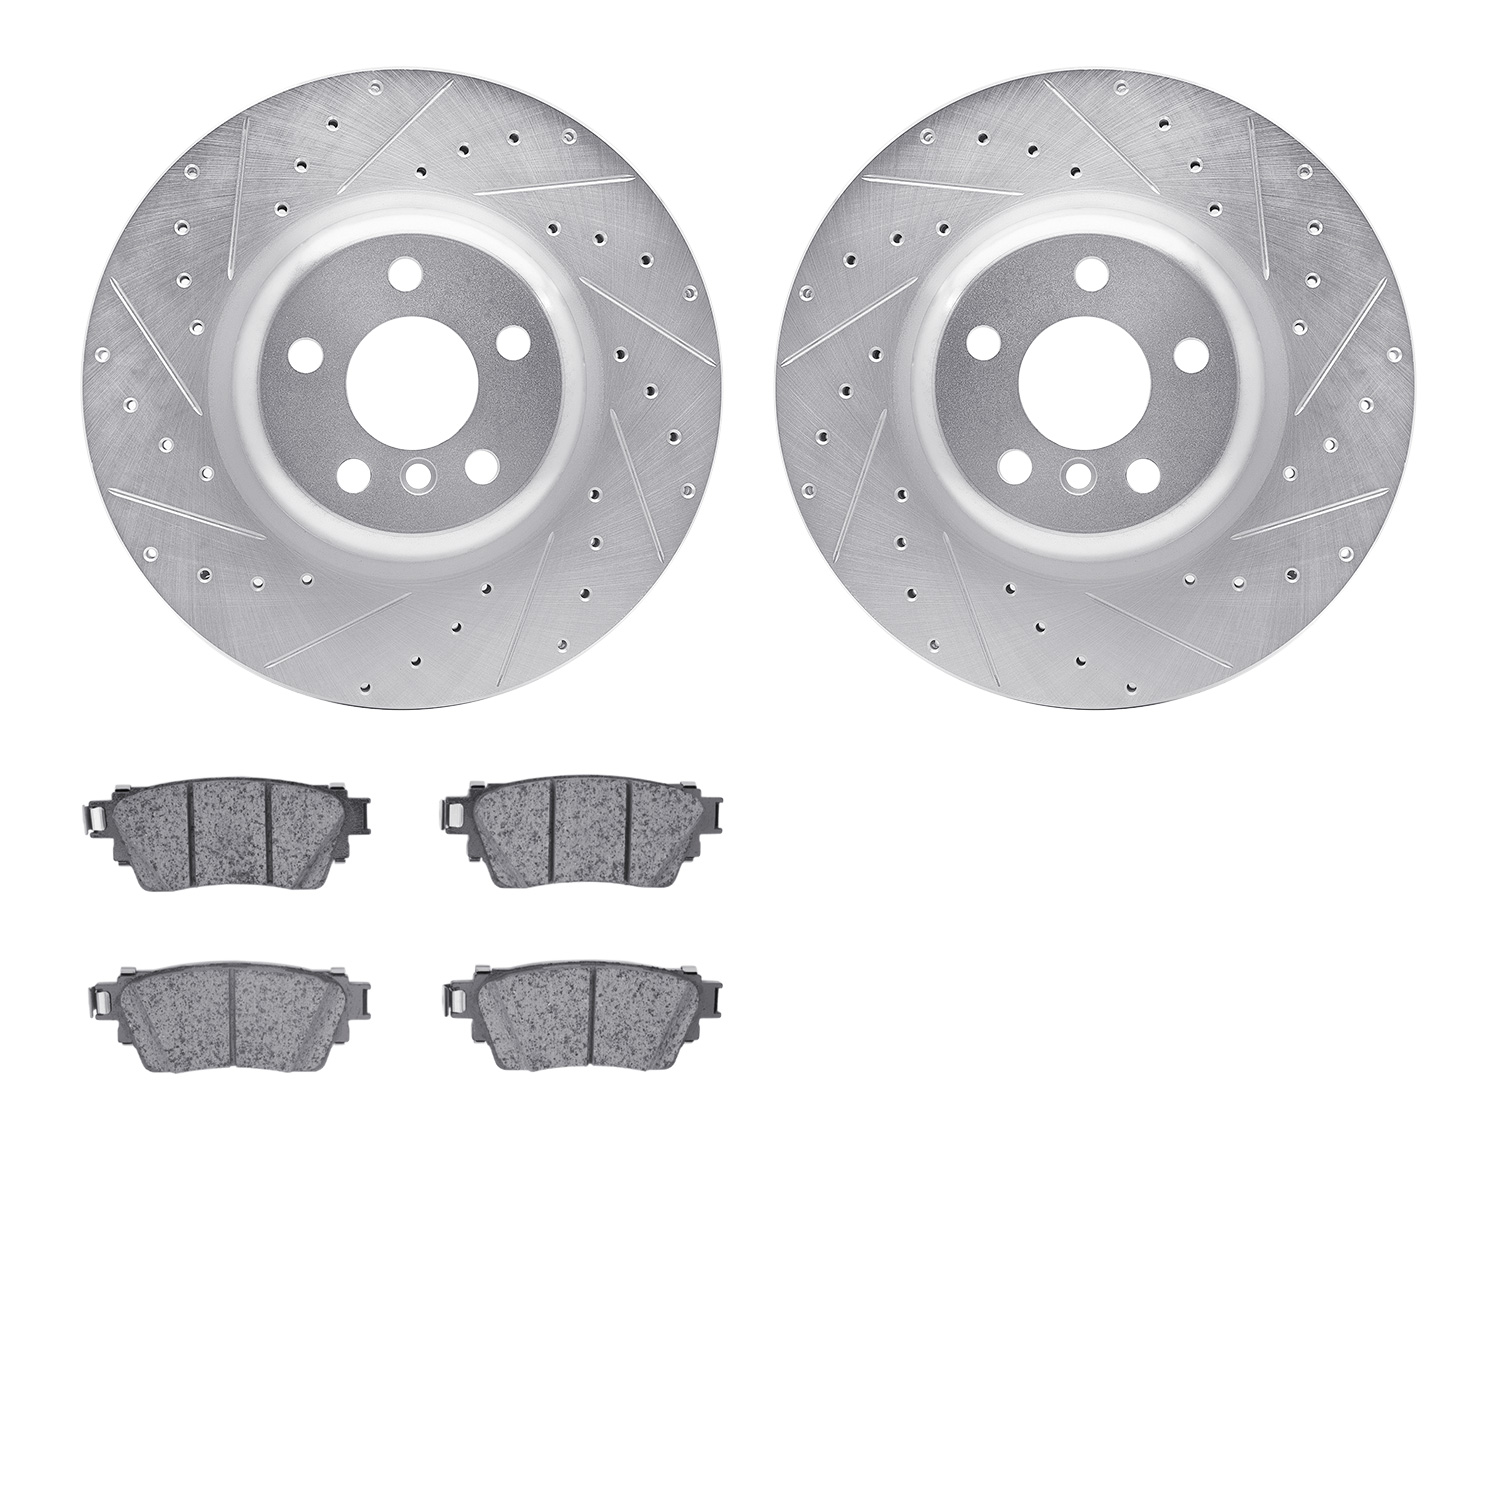 7502-31617 Drilled/Slotted Brake Rotors w/5000 Advanced Brake Pads Kit [Silver], Fits Select Multiple Makes/Models, Position: Re